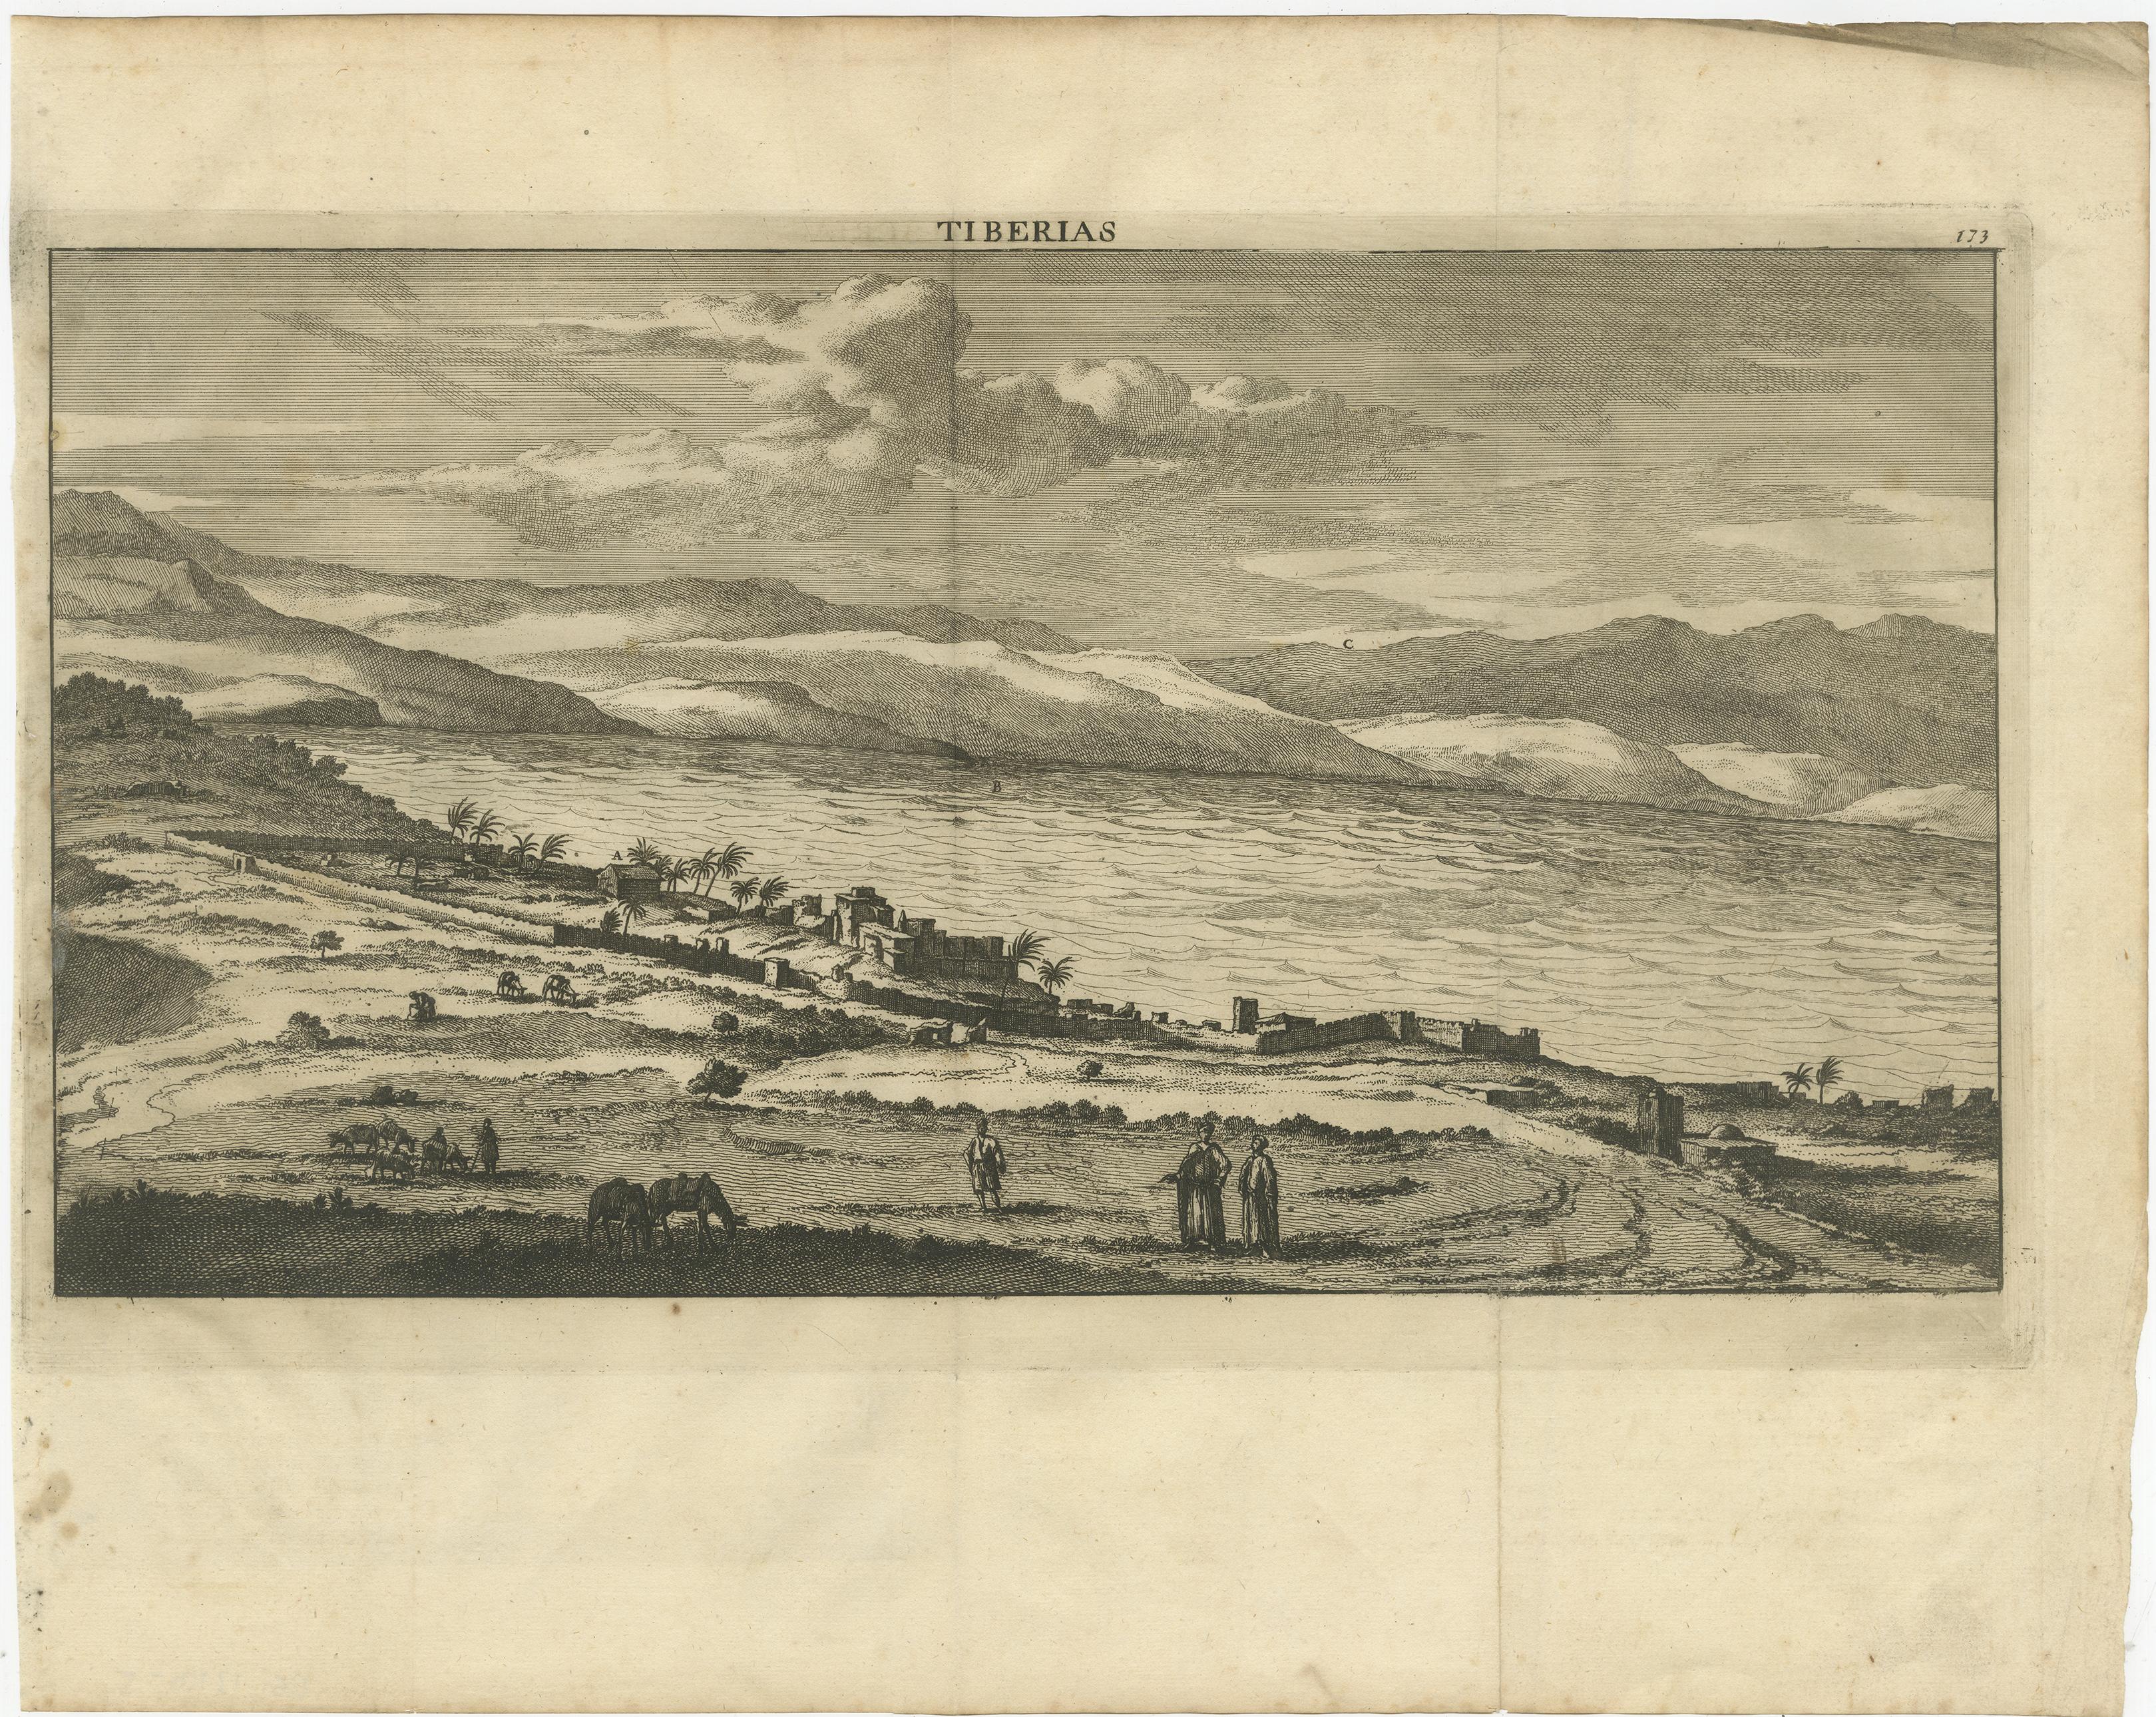 Panoramic view of Tiberias on the Sea of Galilee, Israel. Published by C. de Bruijn, circa 1700.

Cornelis de Bruijn (also spelled Cornelius de Bruyn, pronounced (1652 – 1726/7) was a Dutch artist and traveler. He made two large tours and